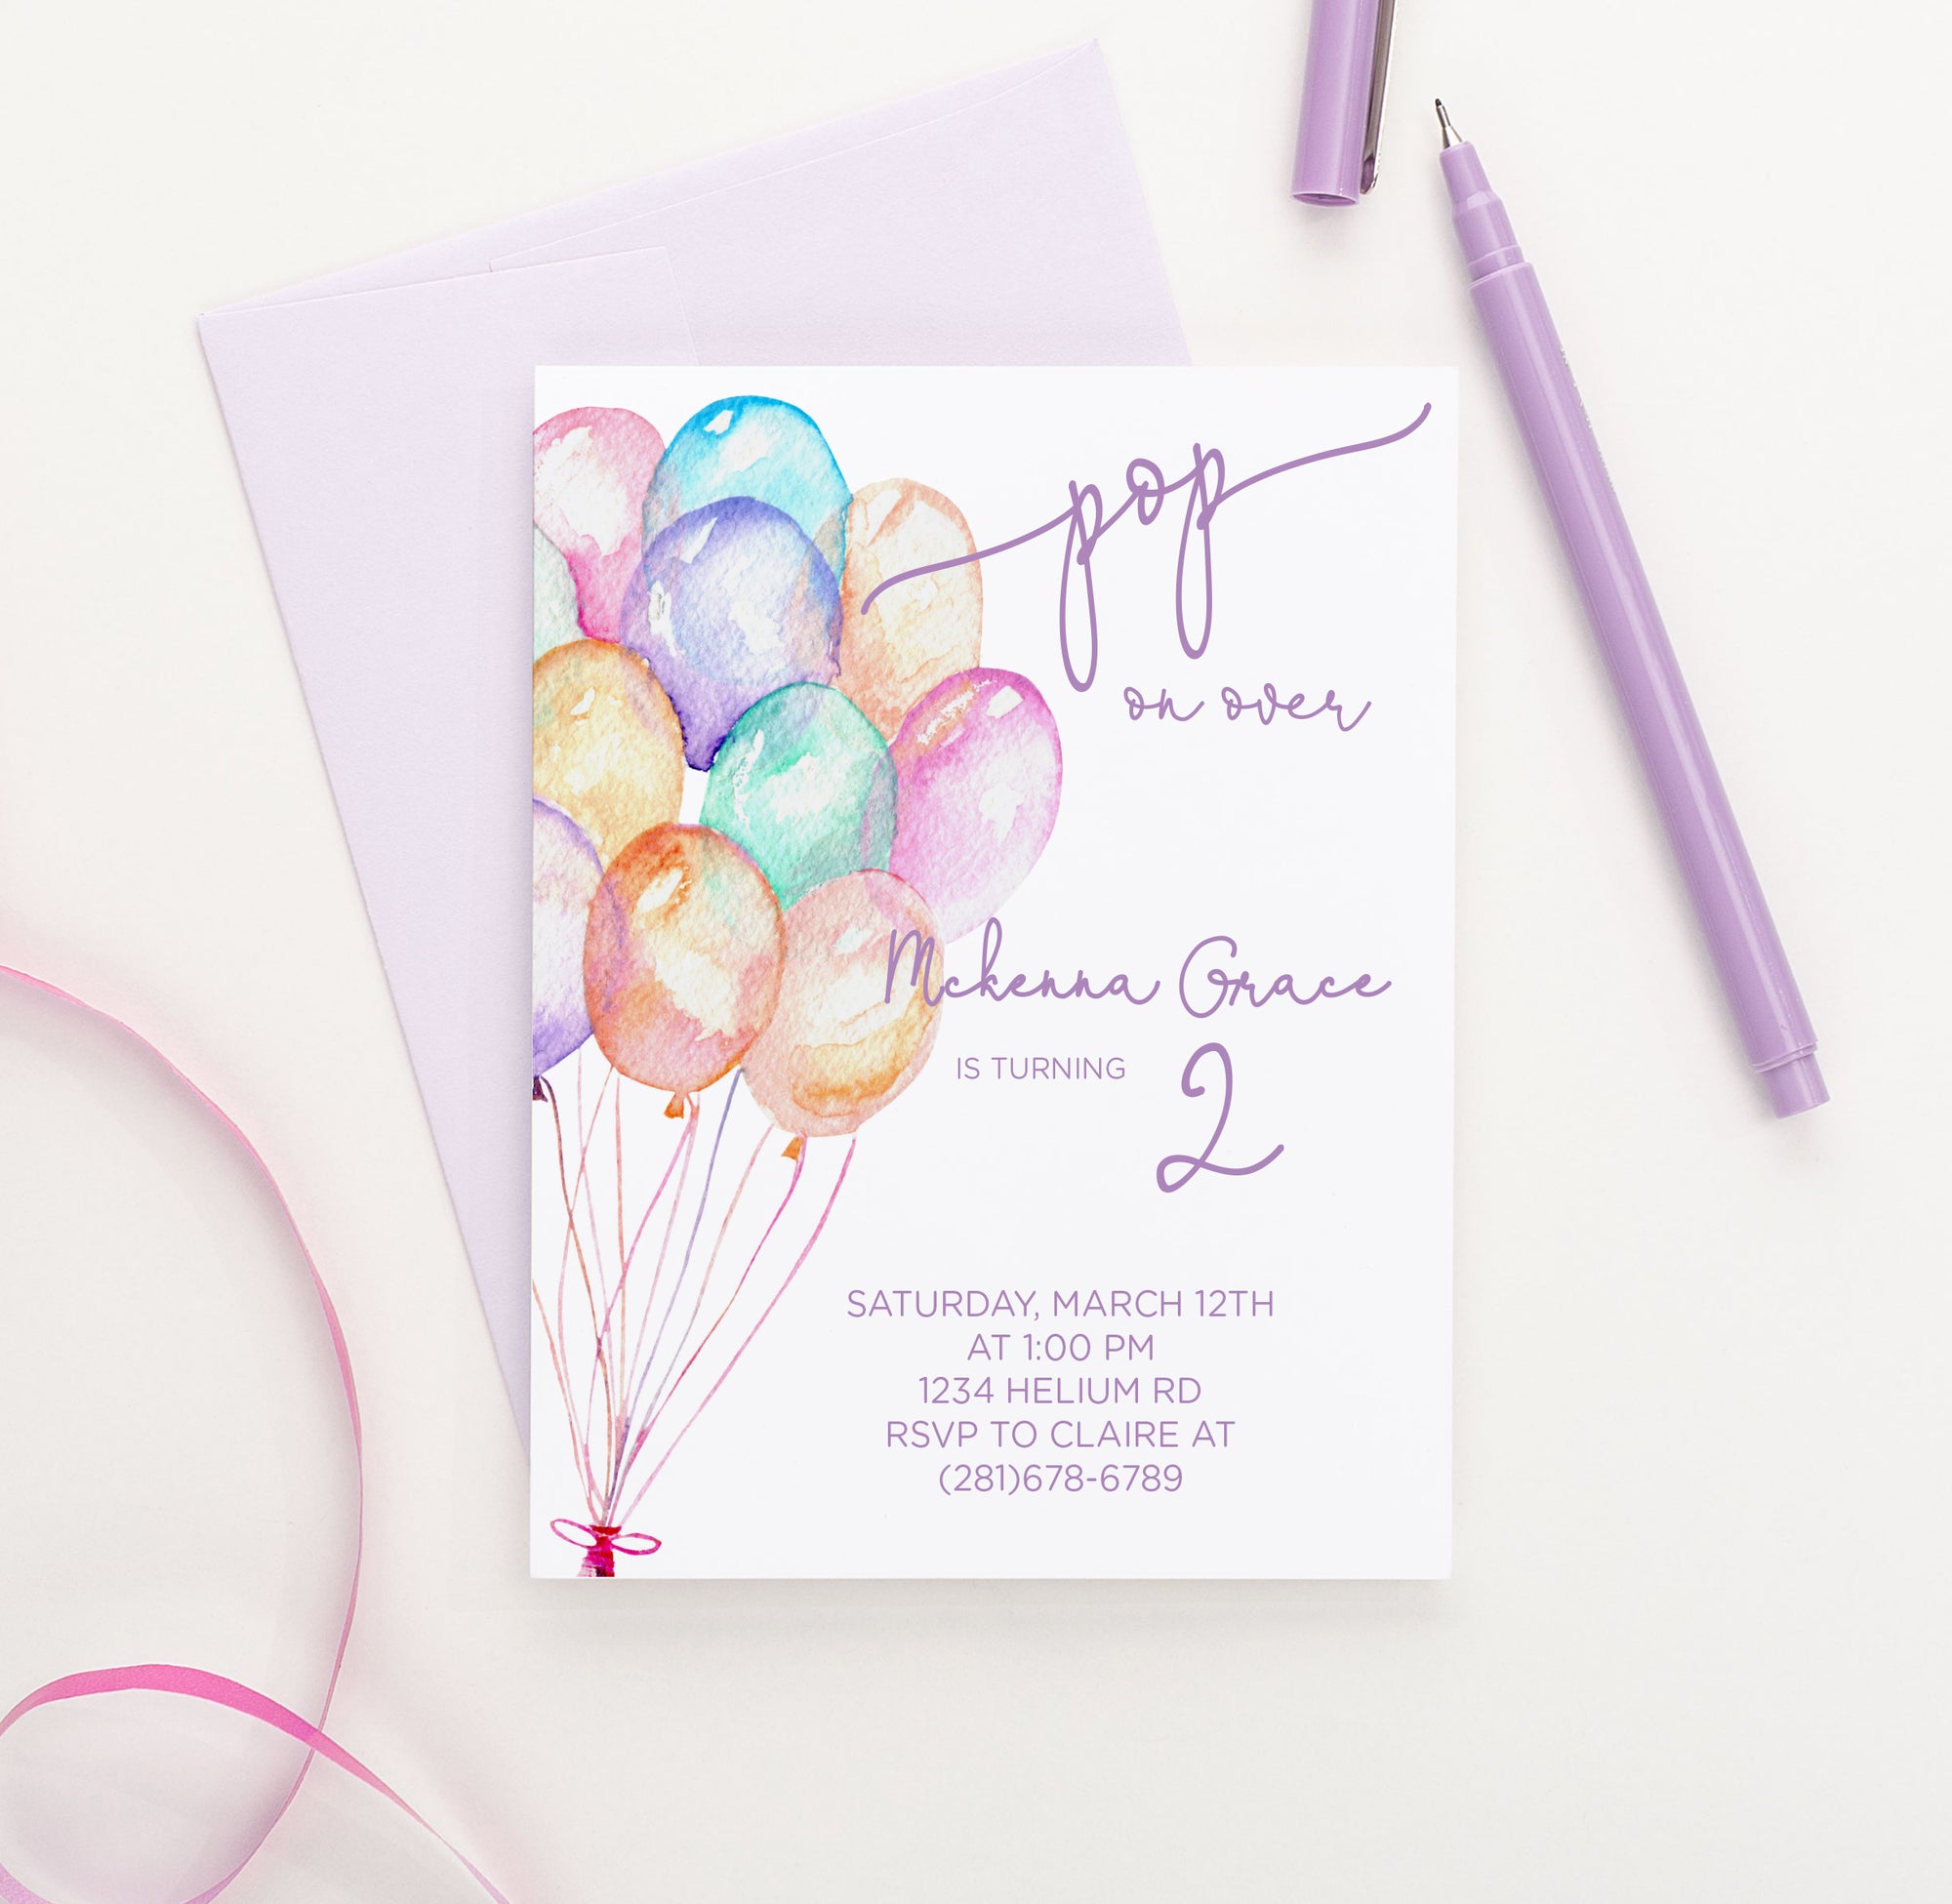 Pop On Over Girls Birthday Invitations With Watercolor Balloons